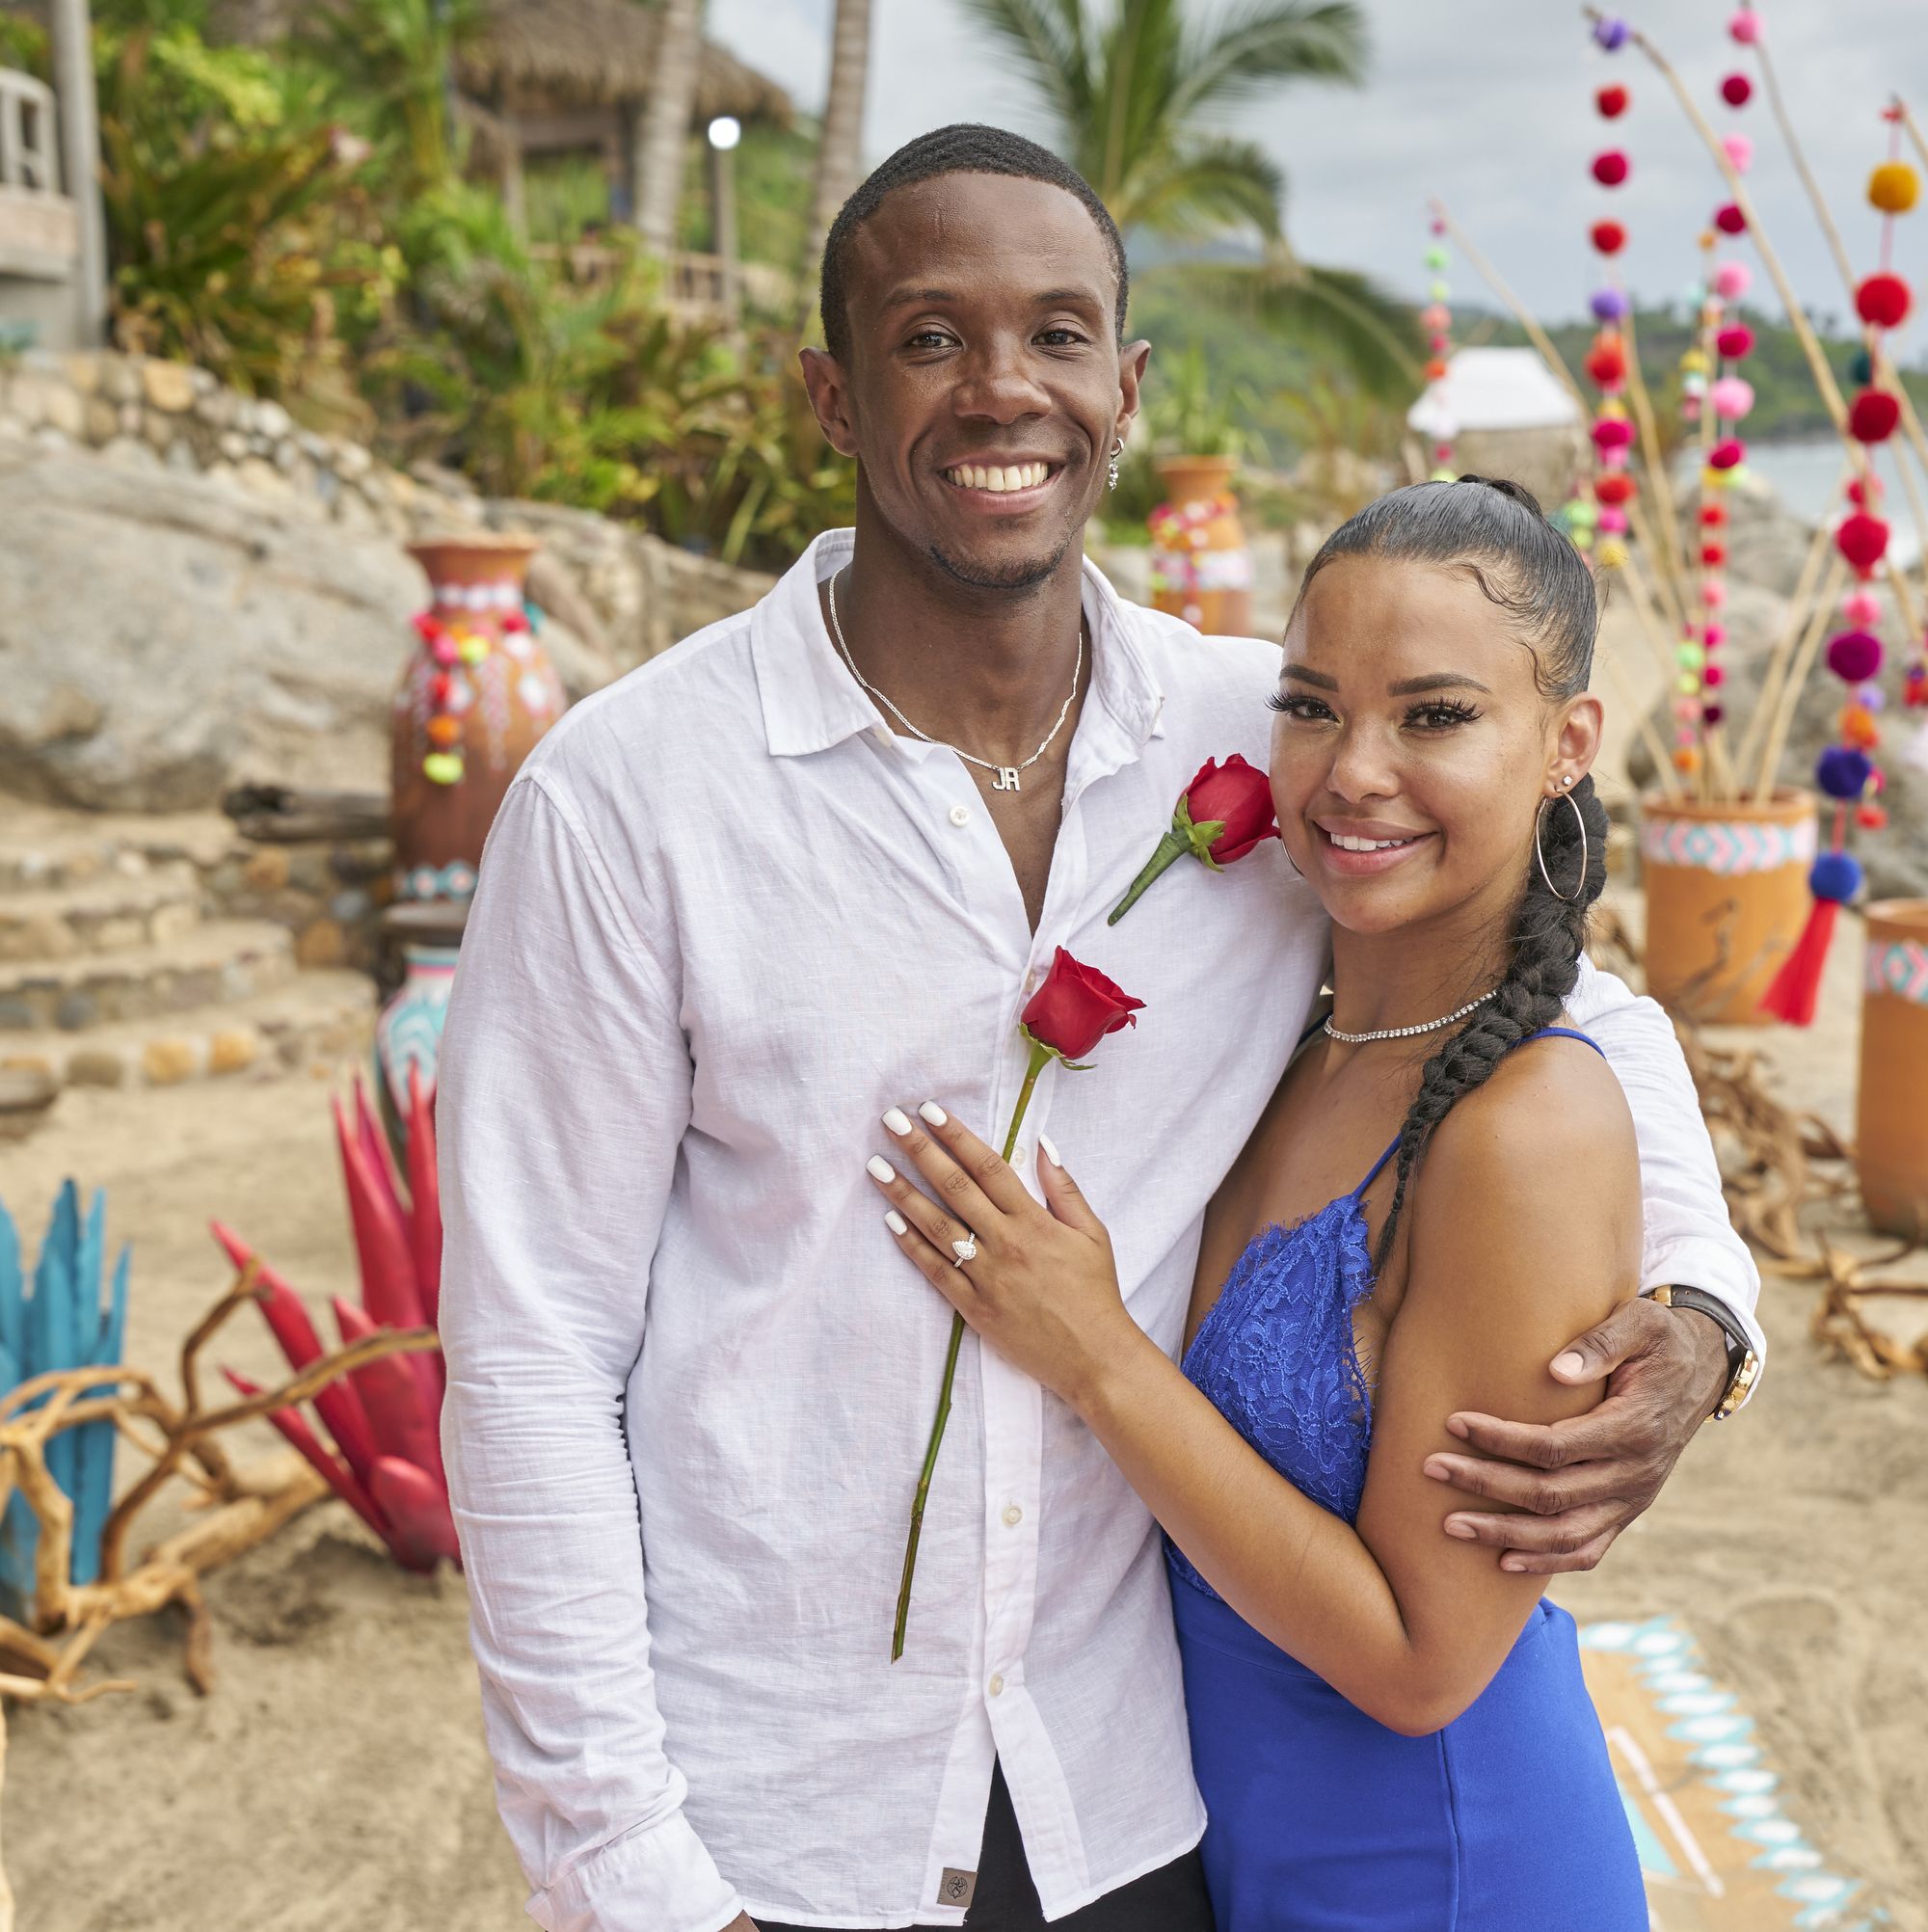 Maurissa Gunn and Riley Christian Confirm Breakup After 'Bachelor in Paradise'